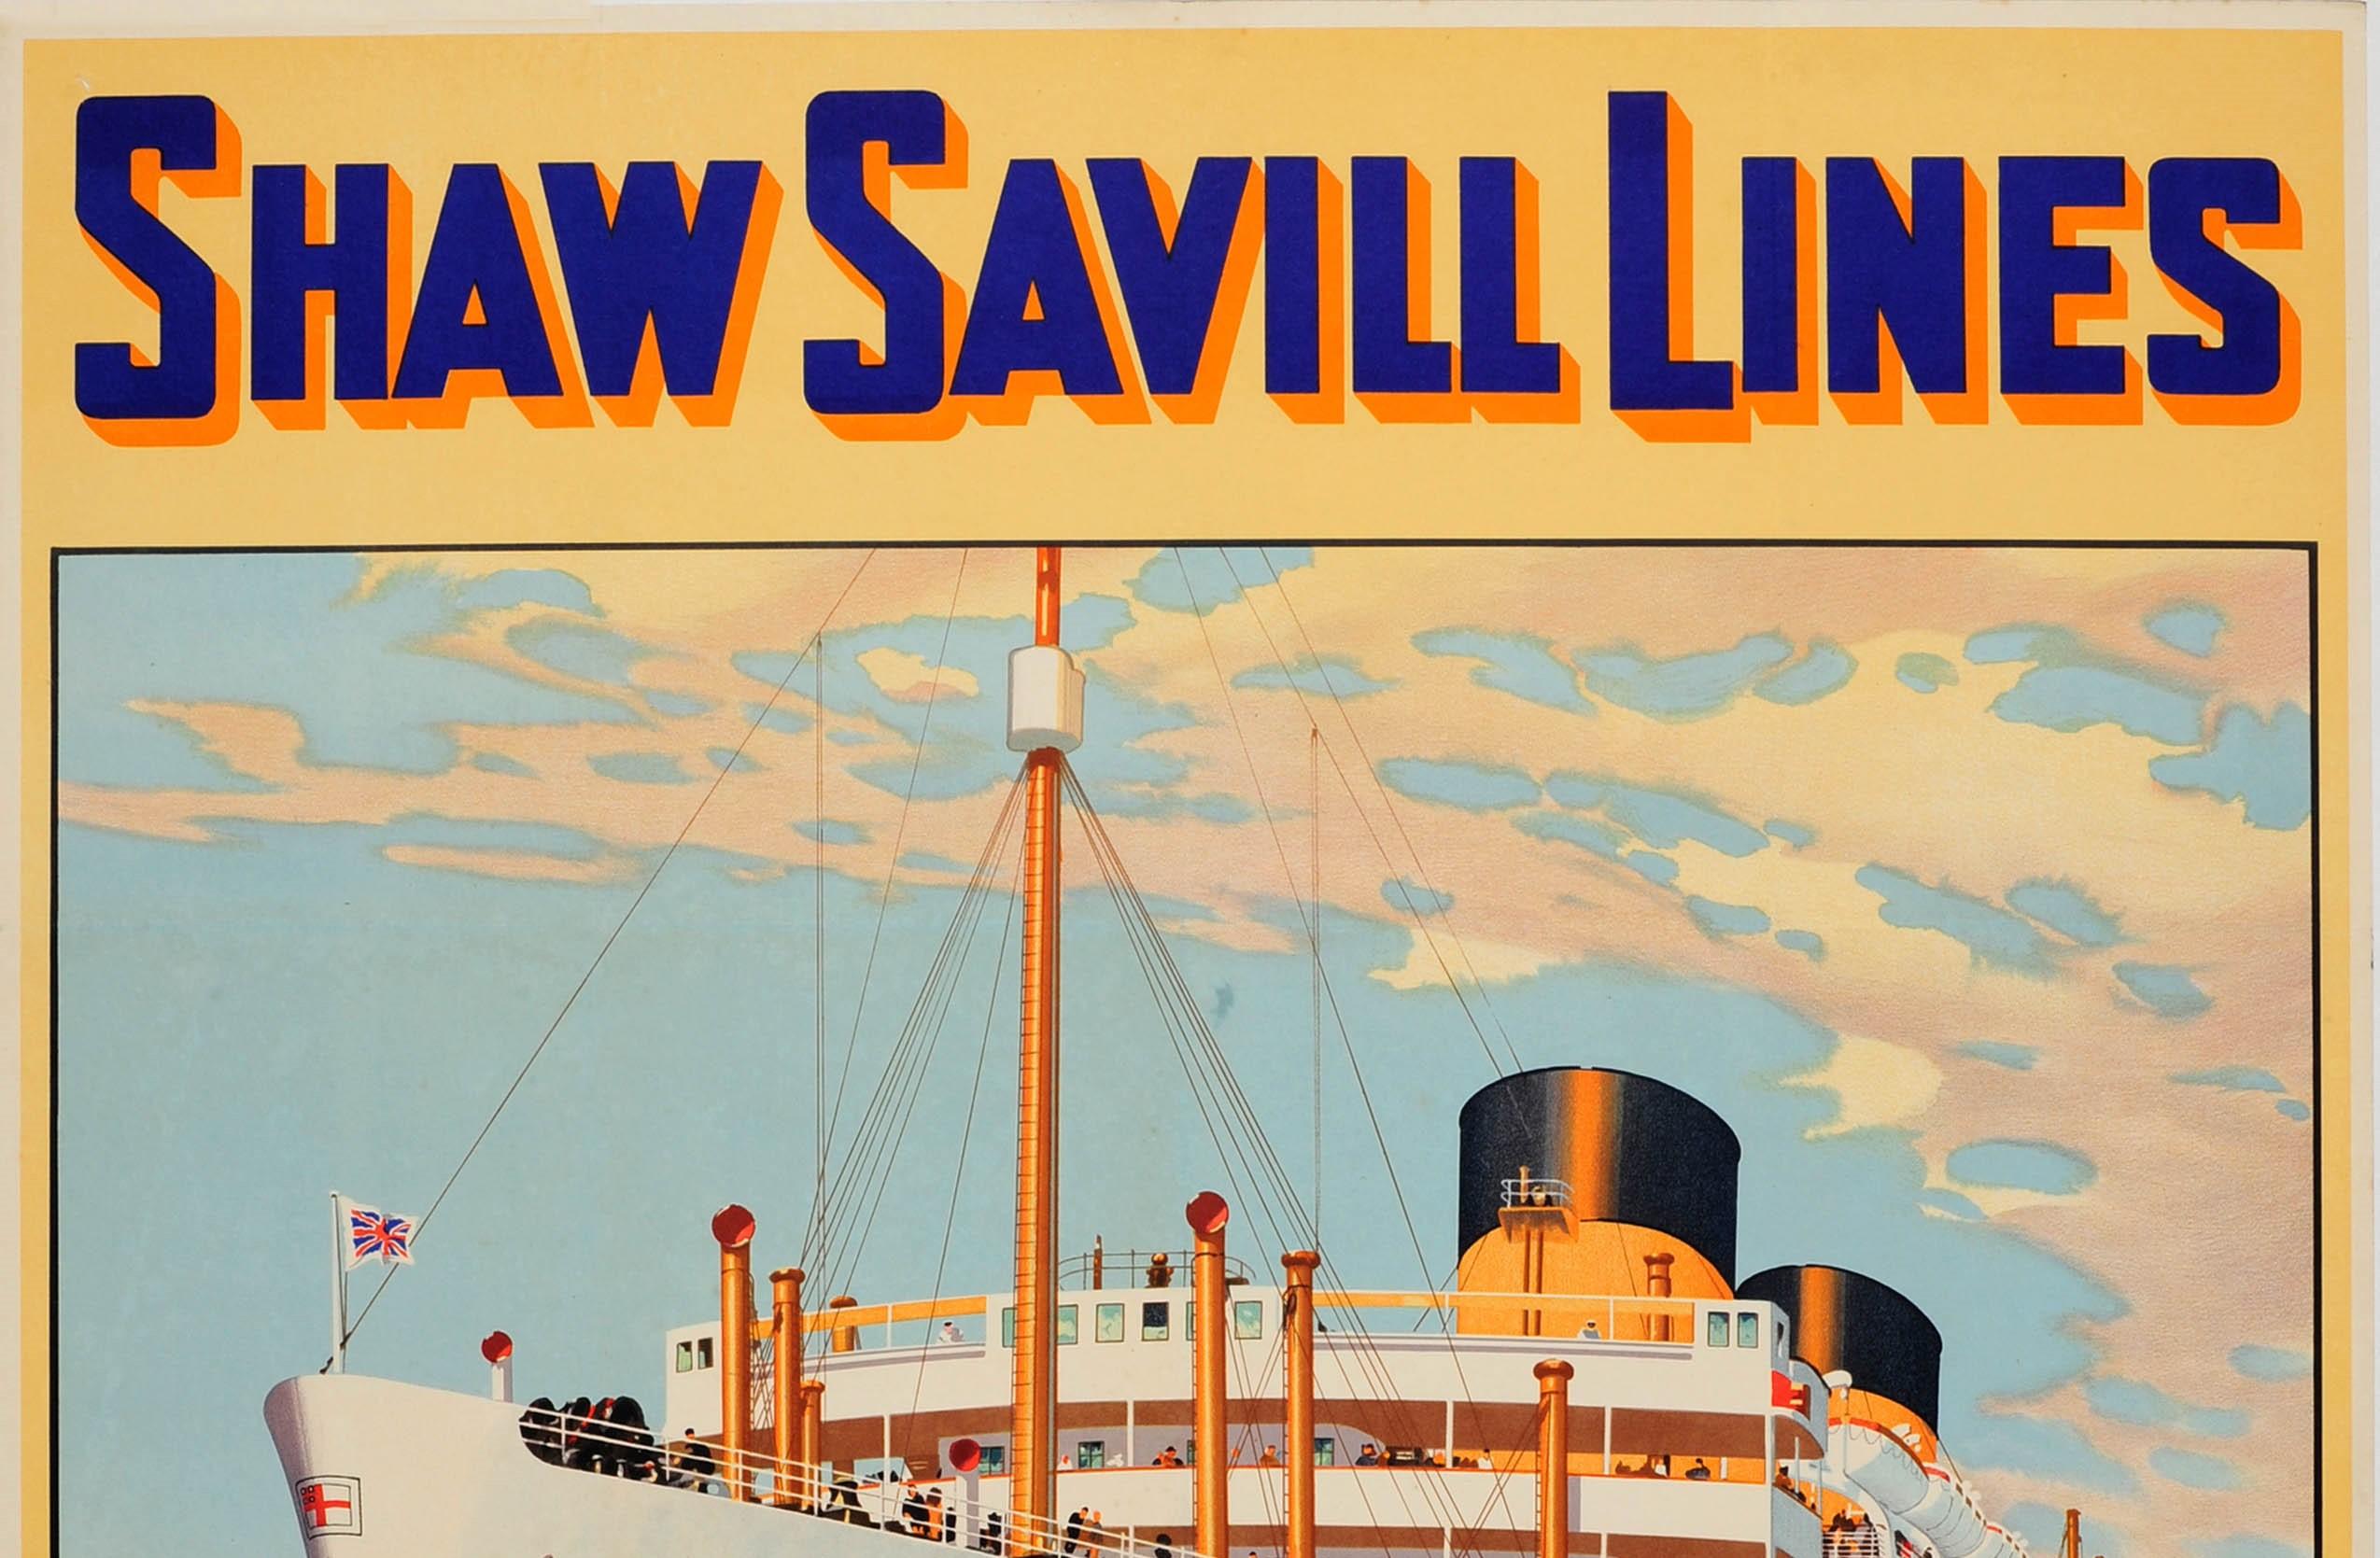 Original Vintage Shaw Savill Lines Cruise Liner Travel Poster Dominion Monarch - Print by William McDowell